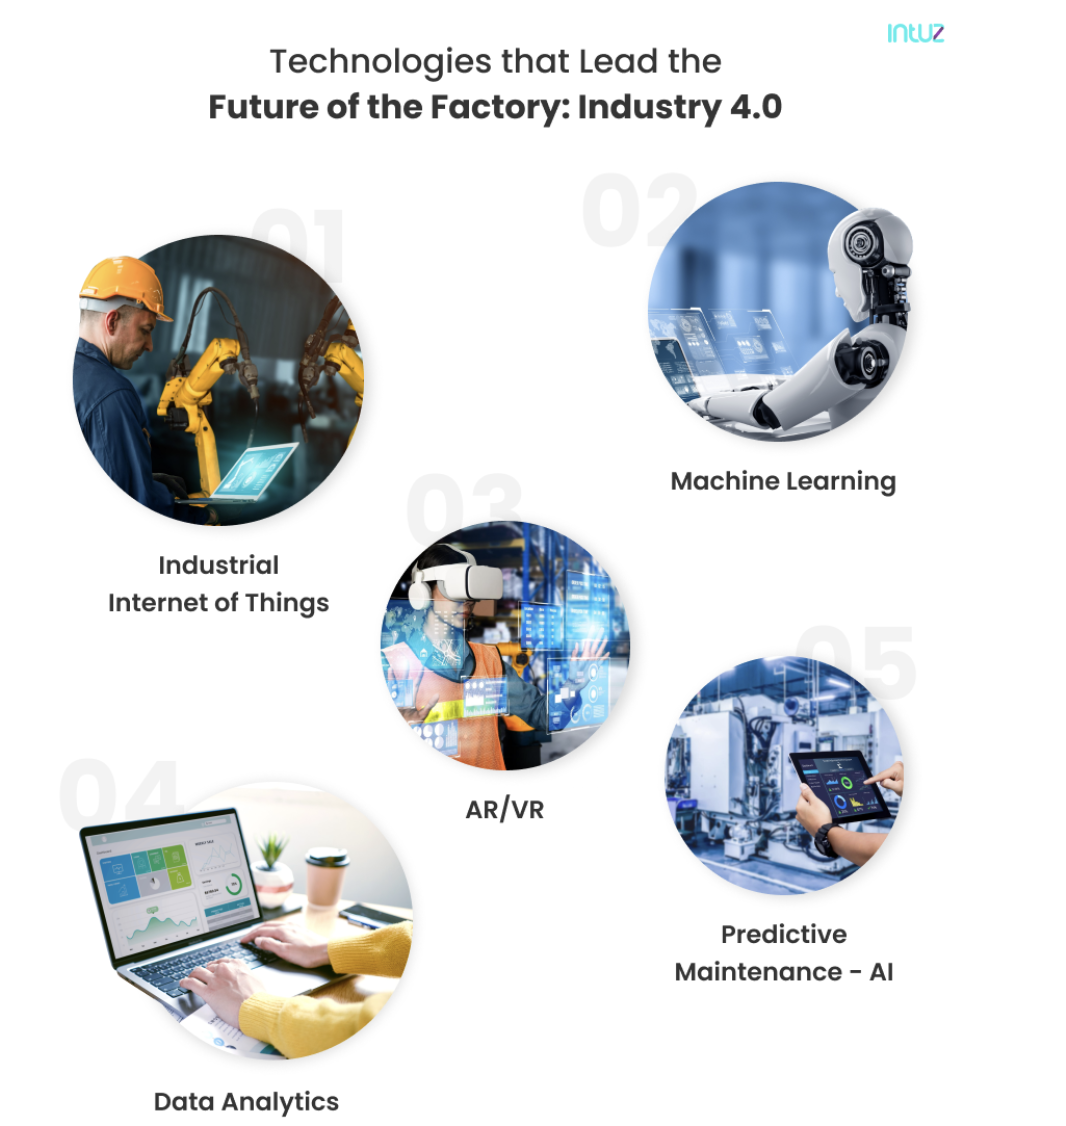 examples of digital technologies leading the future of work within factories 